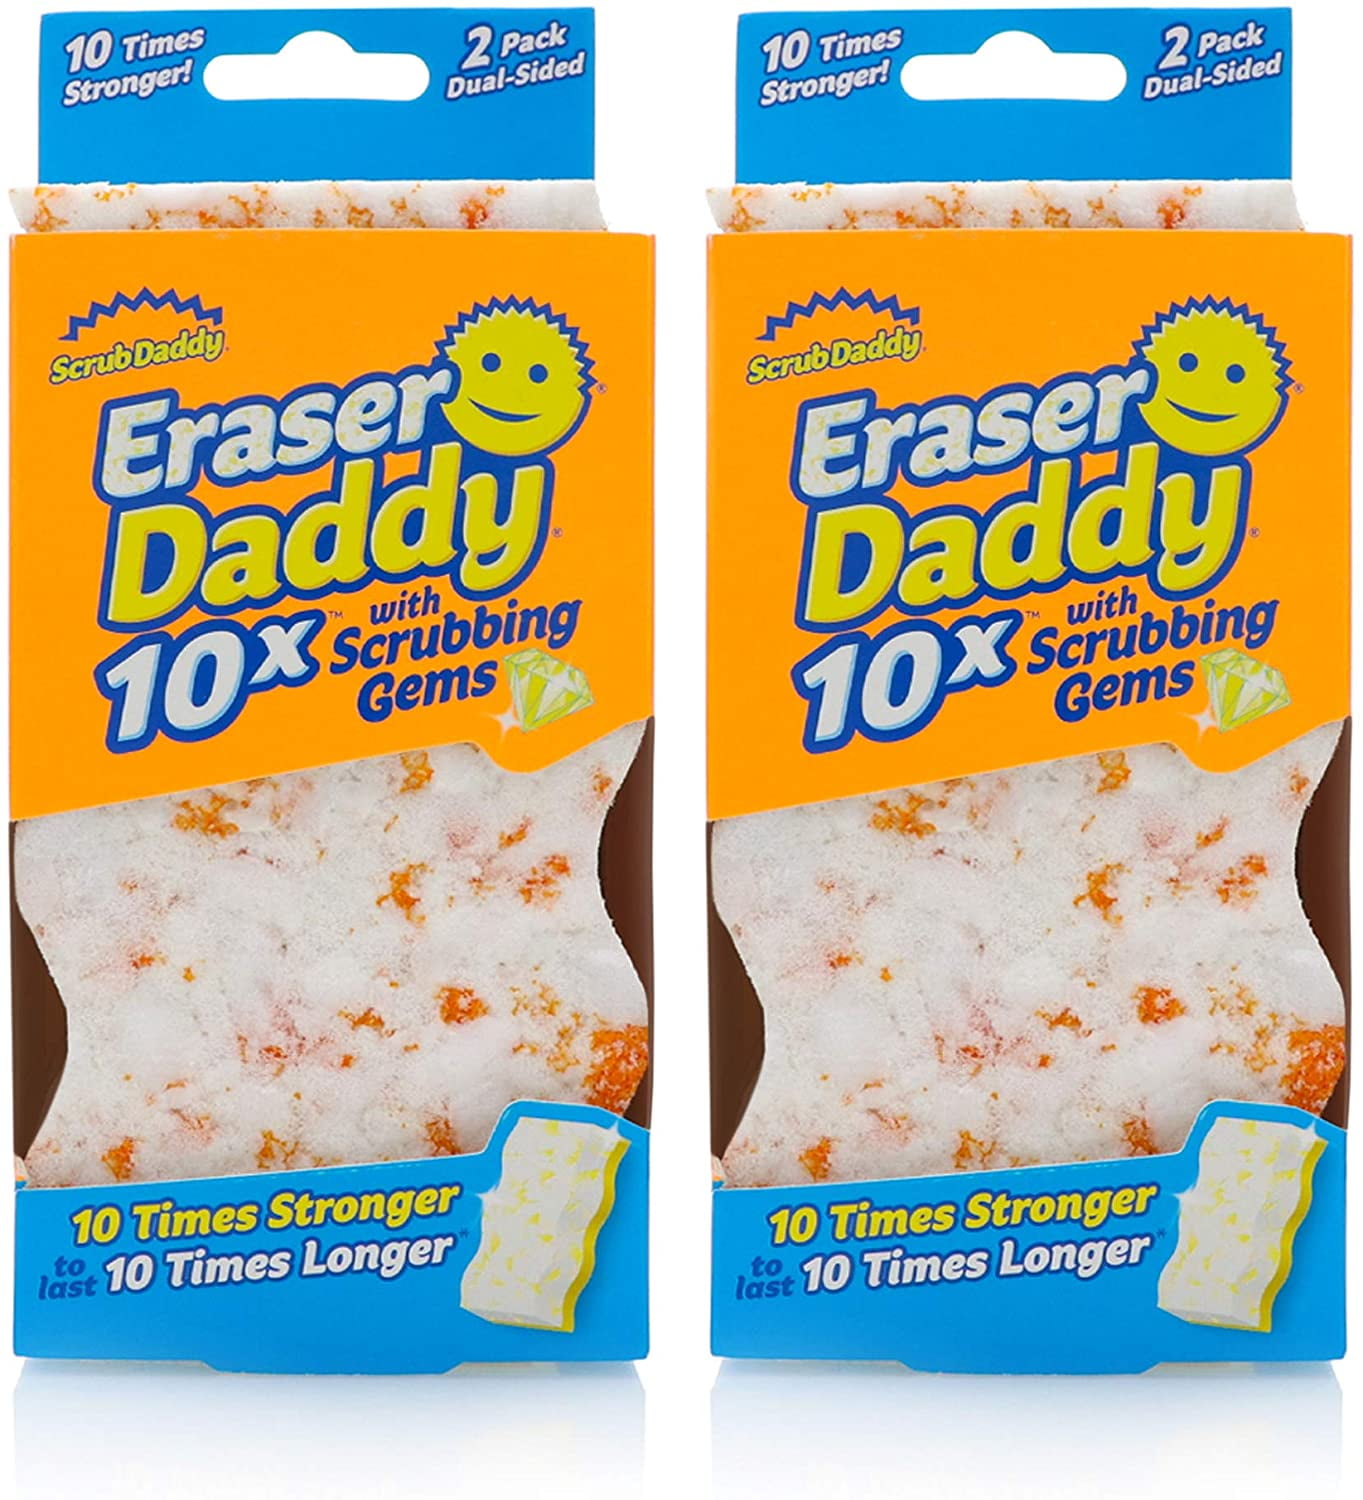 Made to be 10x stronger than the ordinary eraser, the Eraser Daddy